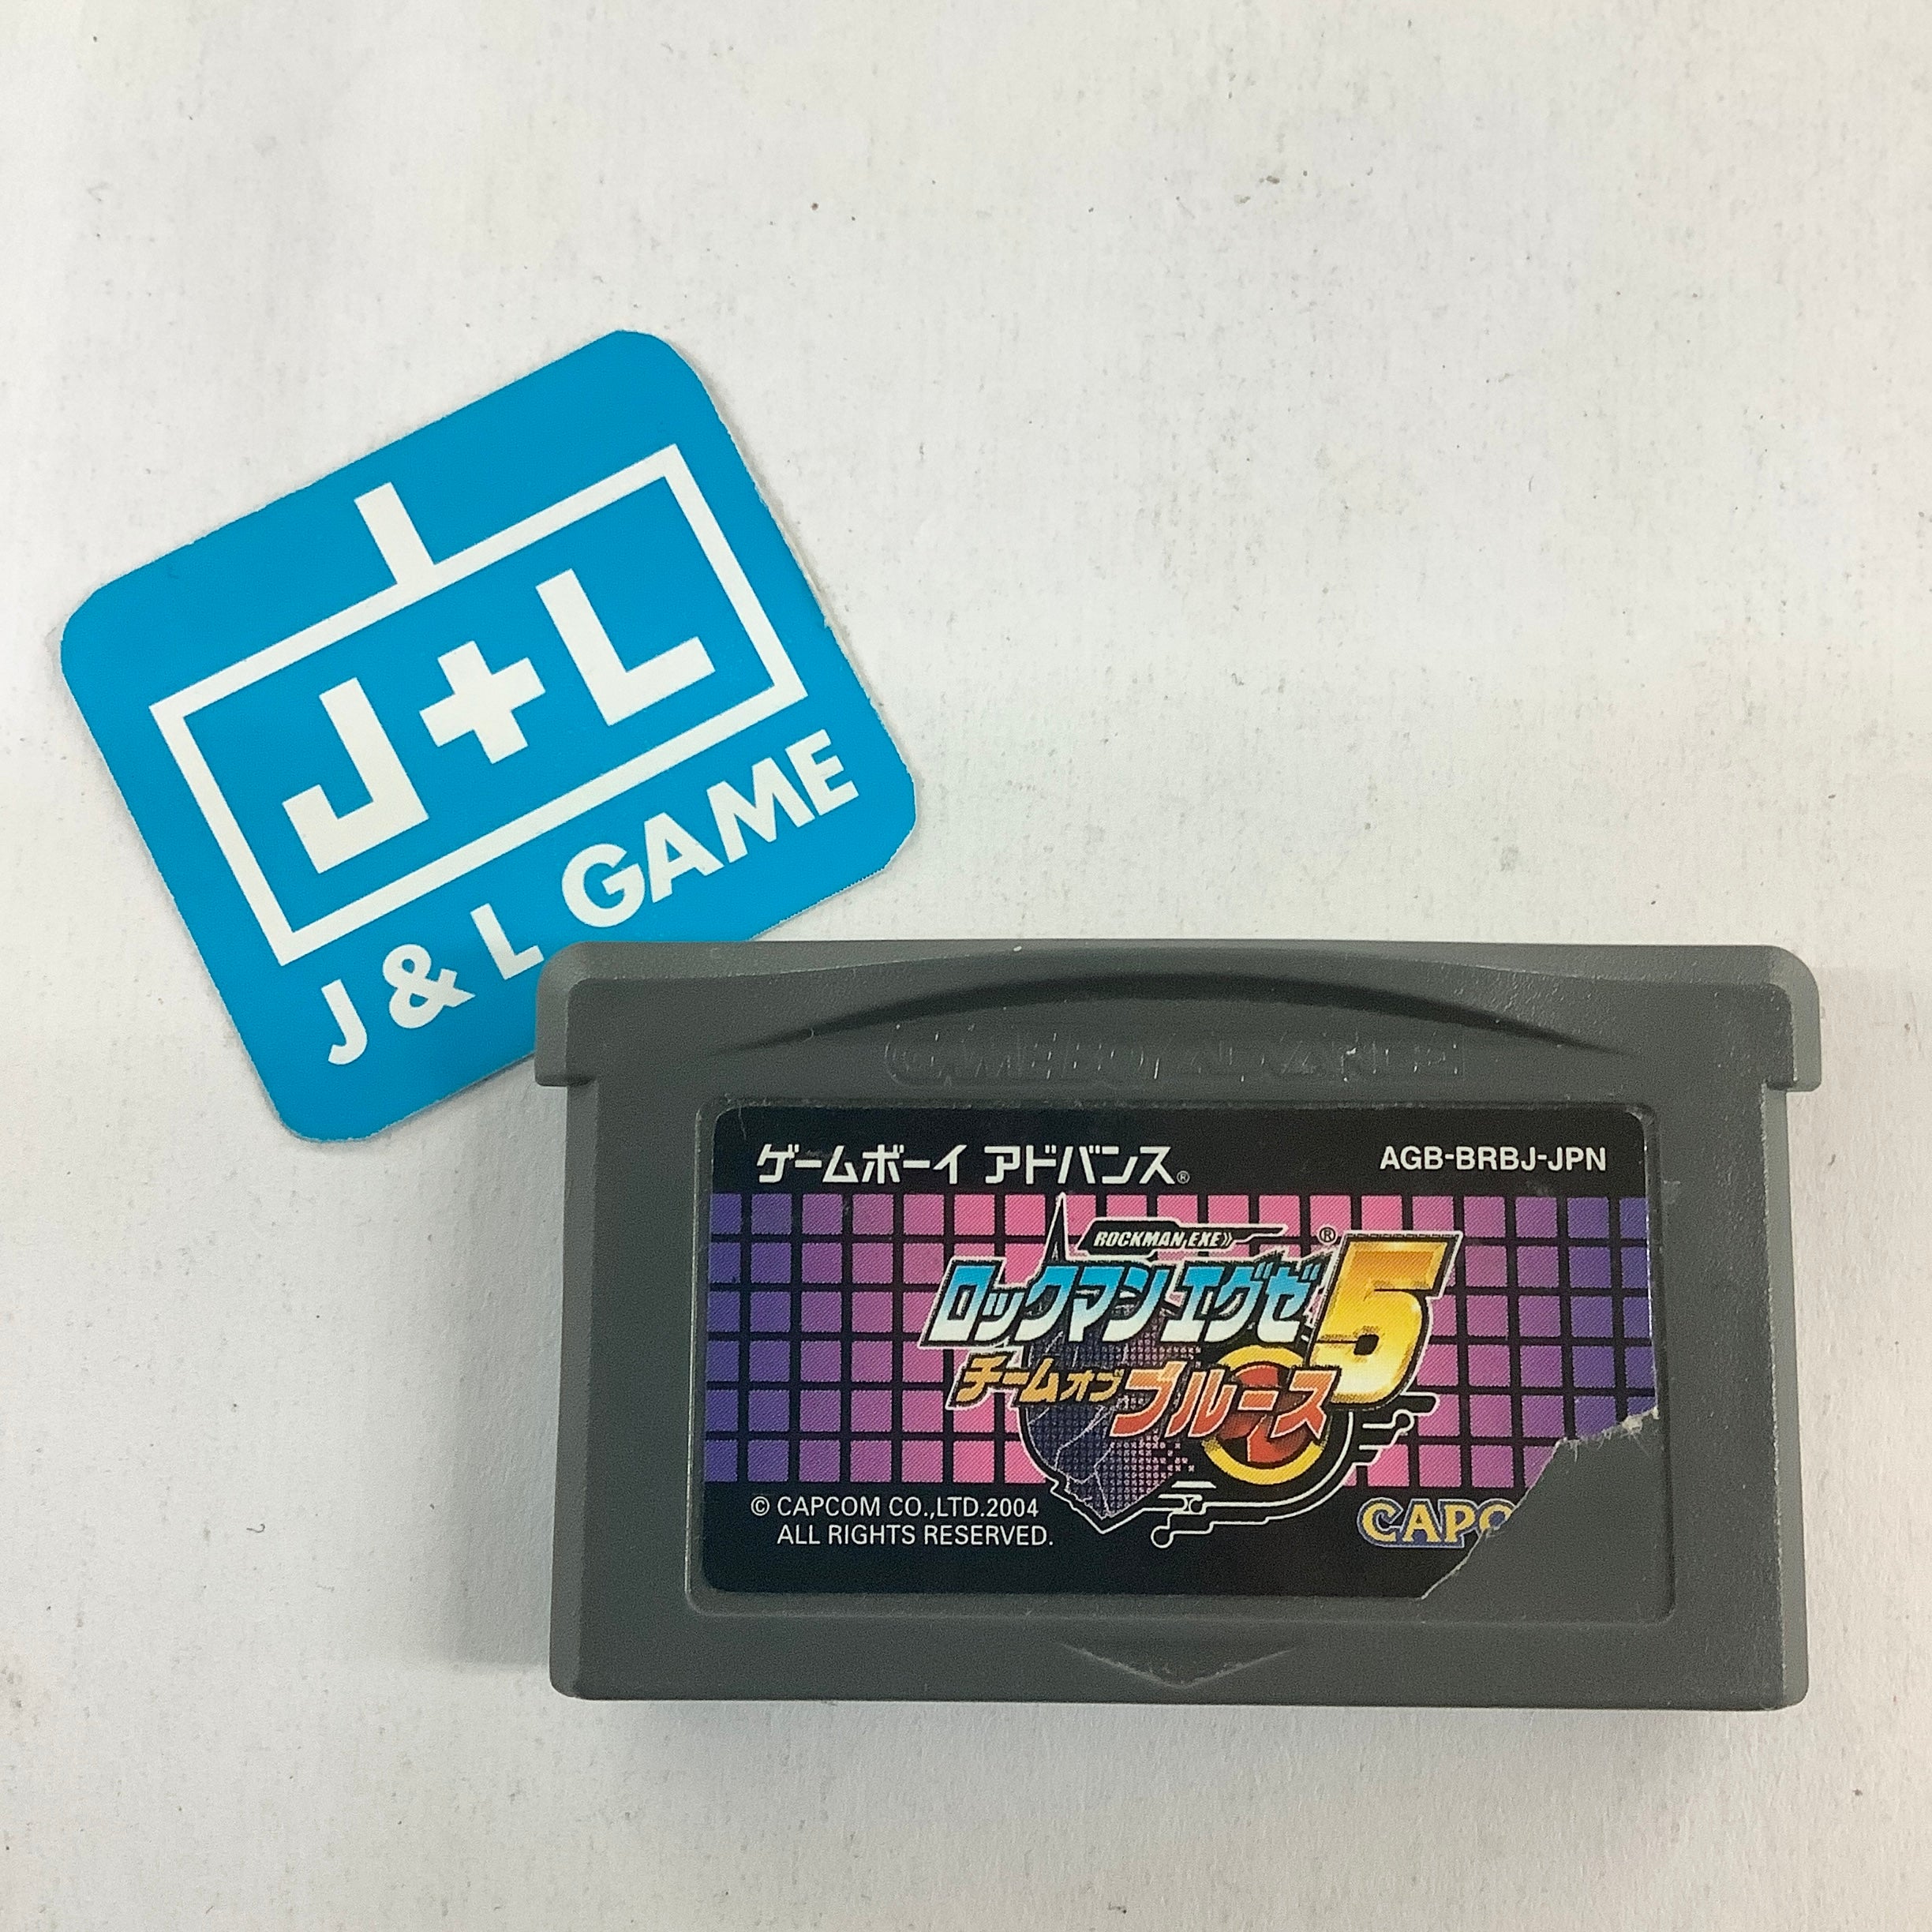 RockMan EXE 5: Team of Blues - (GBA) Game Boy Advance [Pre-Owned] (Japanese Import) Video Games Capcom   